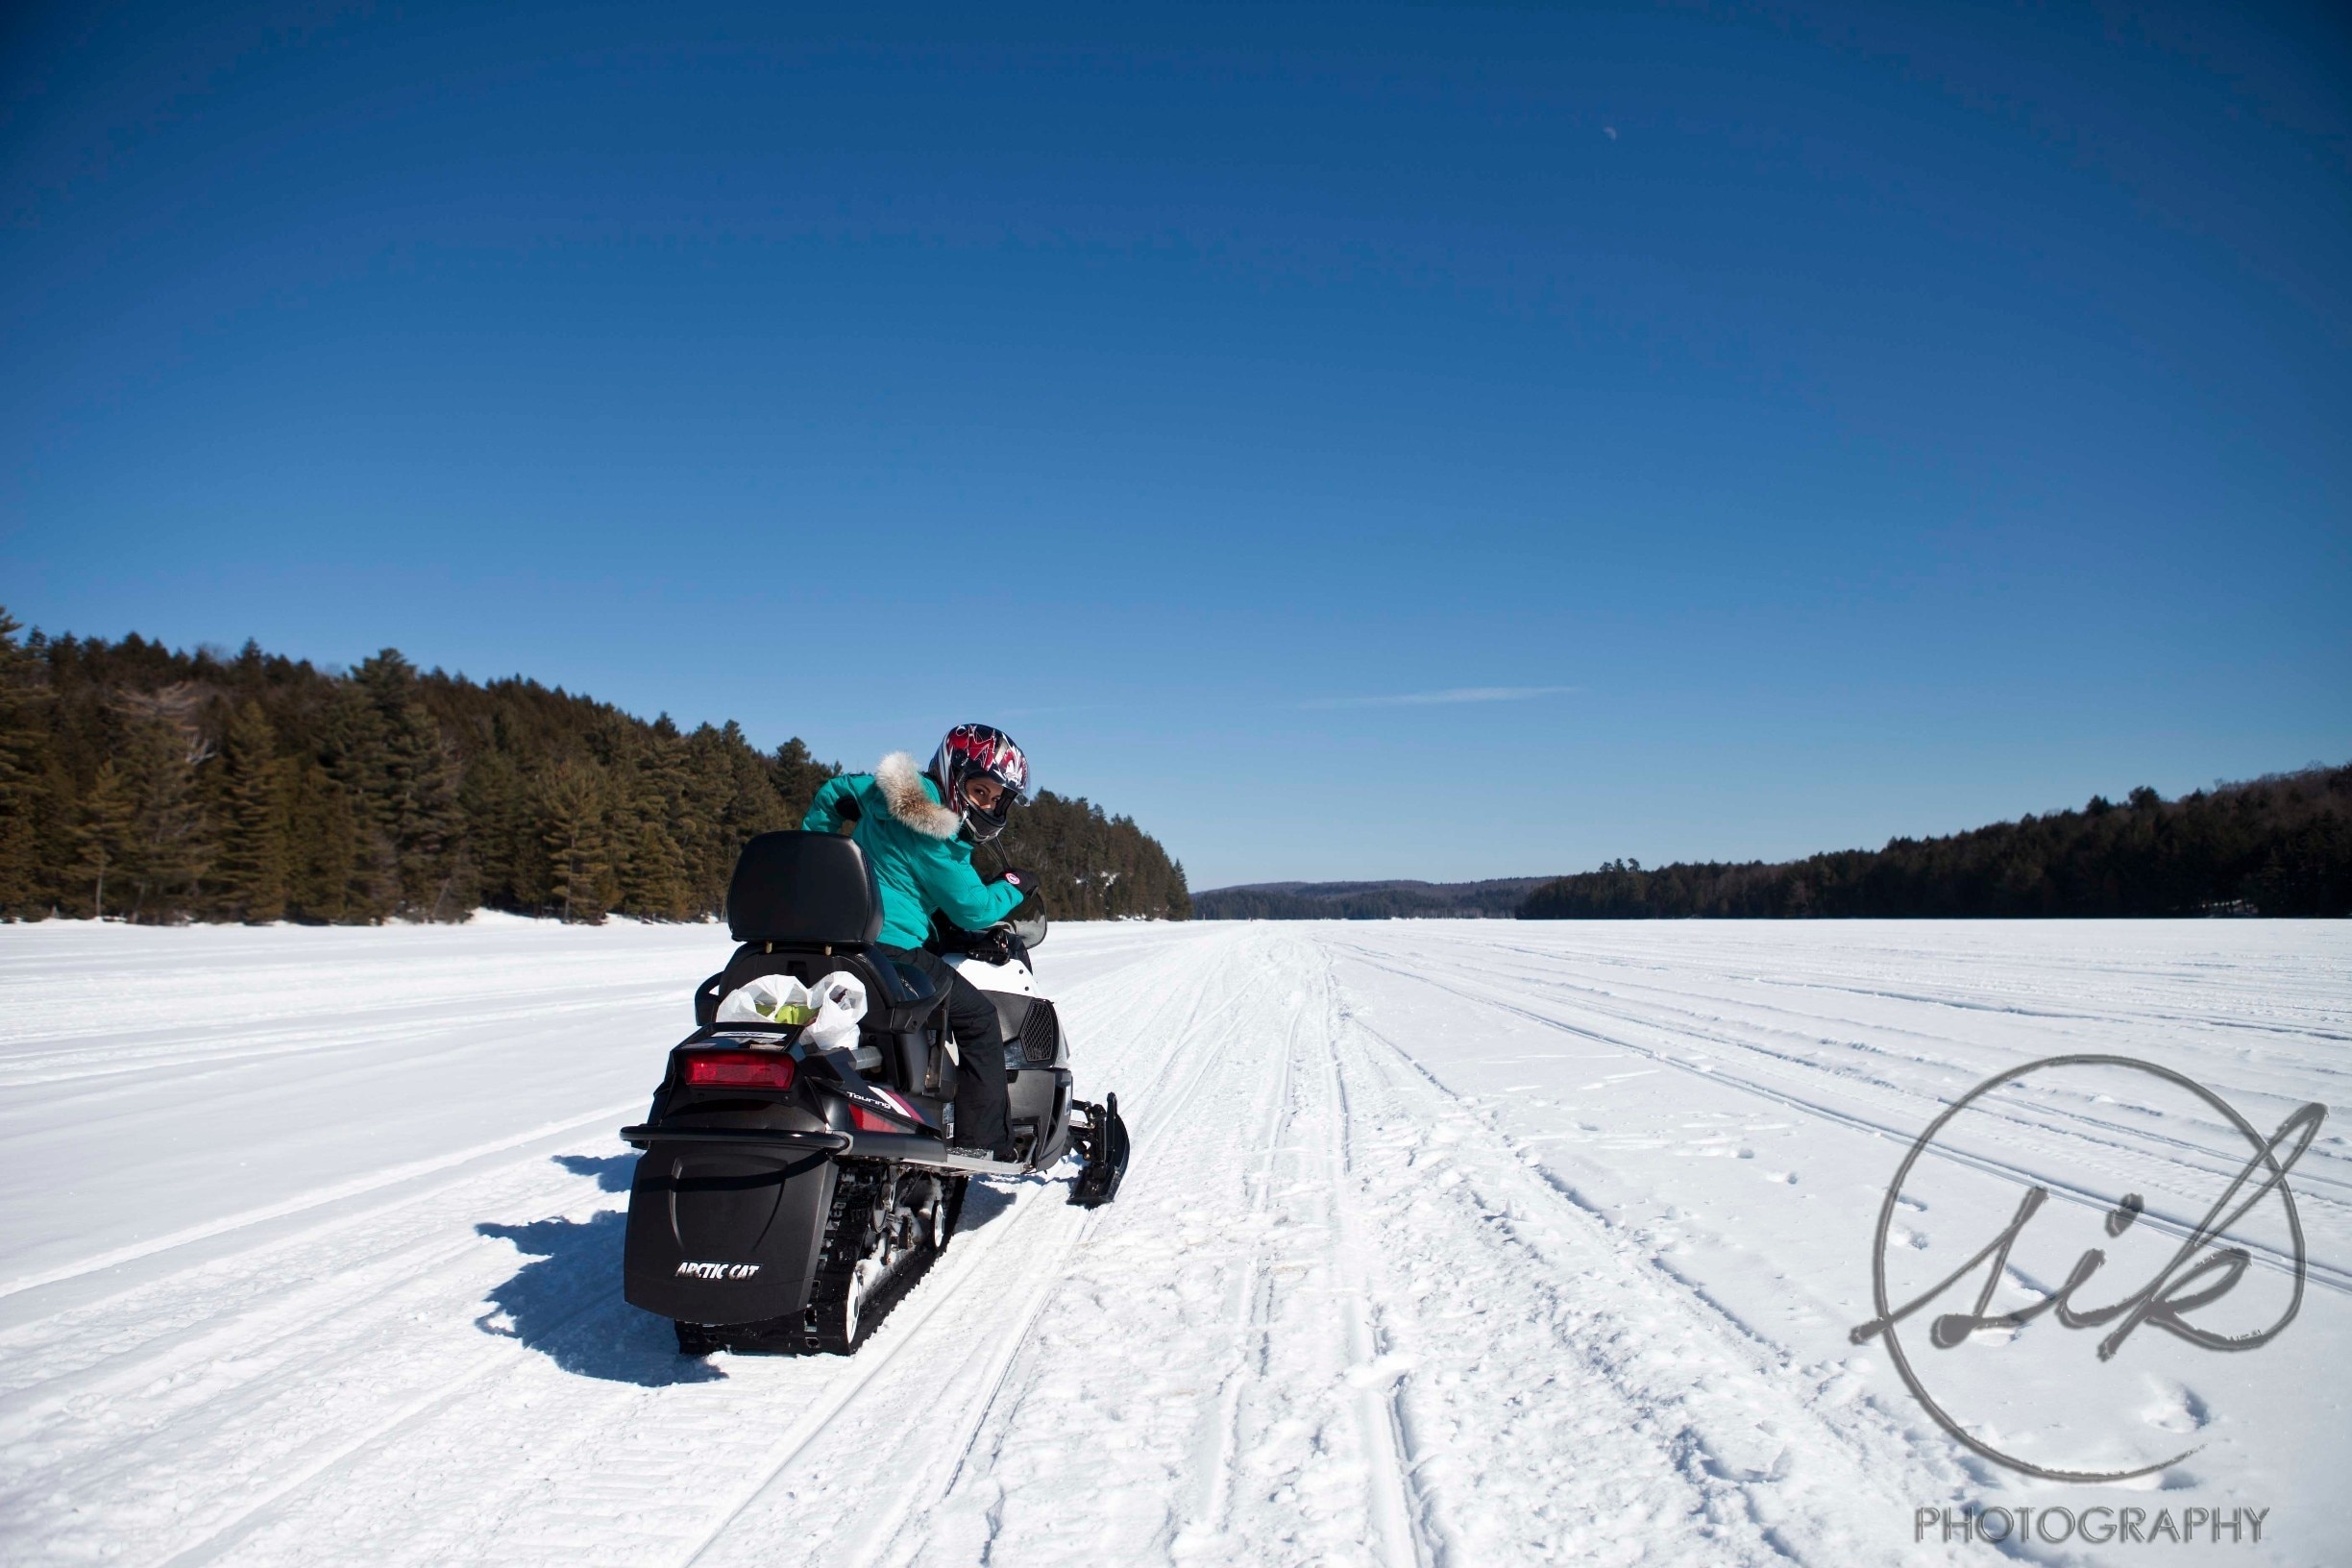 With more than 80 000 acres of forest, 50 lakes and 300 km of scenic trails, Haliburton Forest is one of the top snowmobiling destinations in North America. #snow #ontario #adventure #snowmobiling #canada #winter